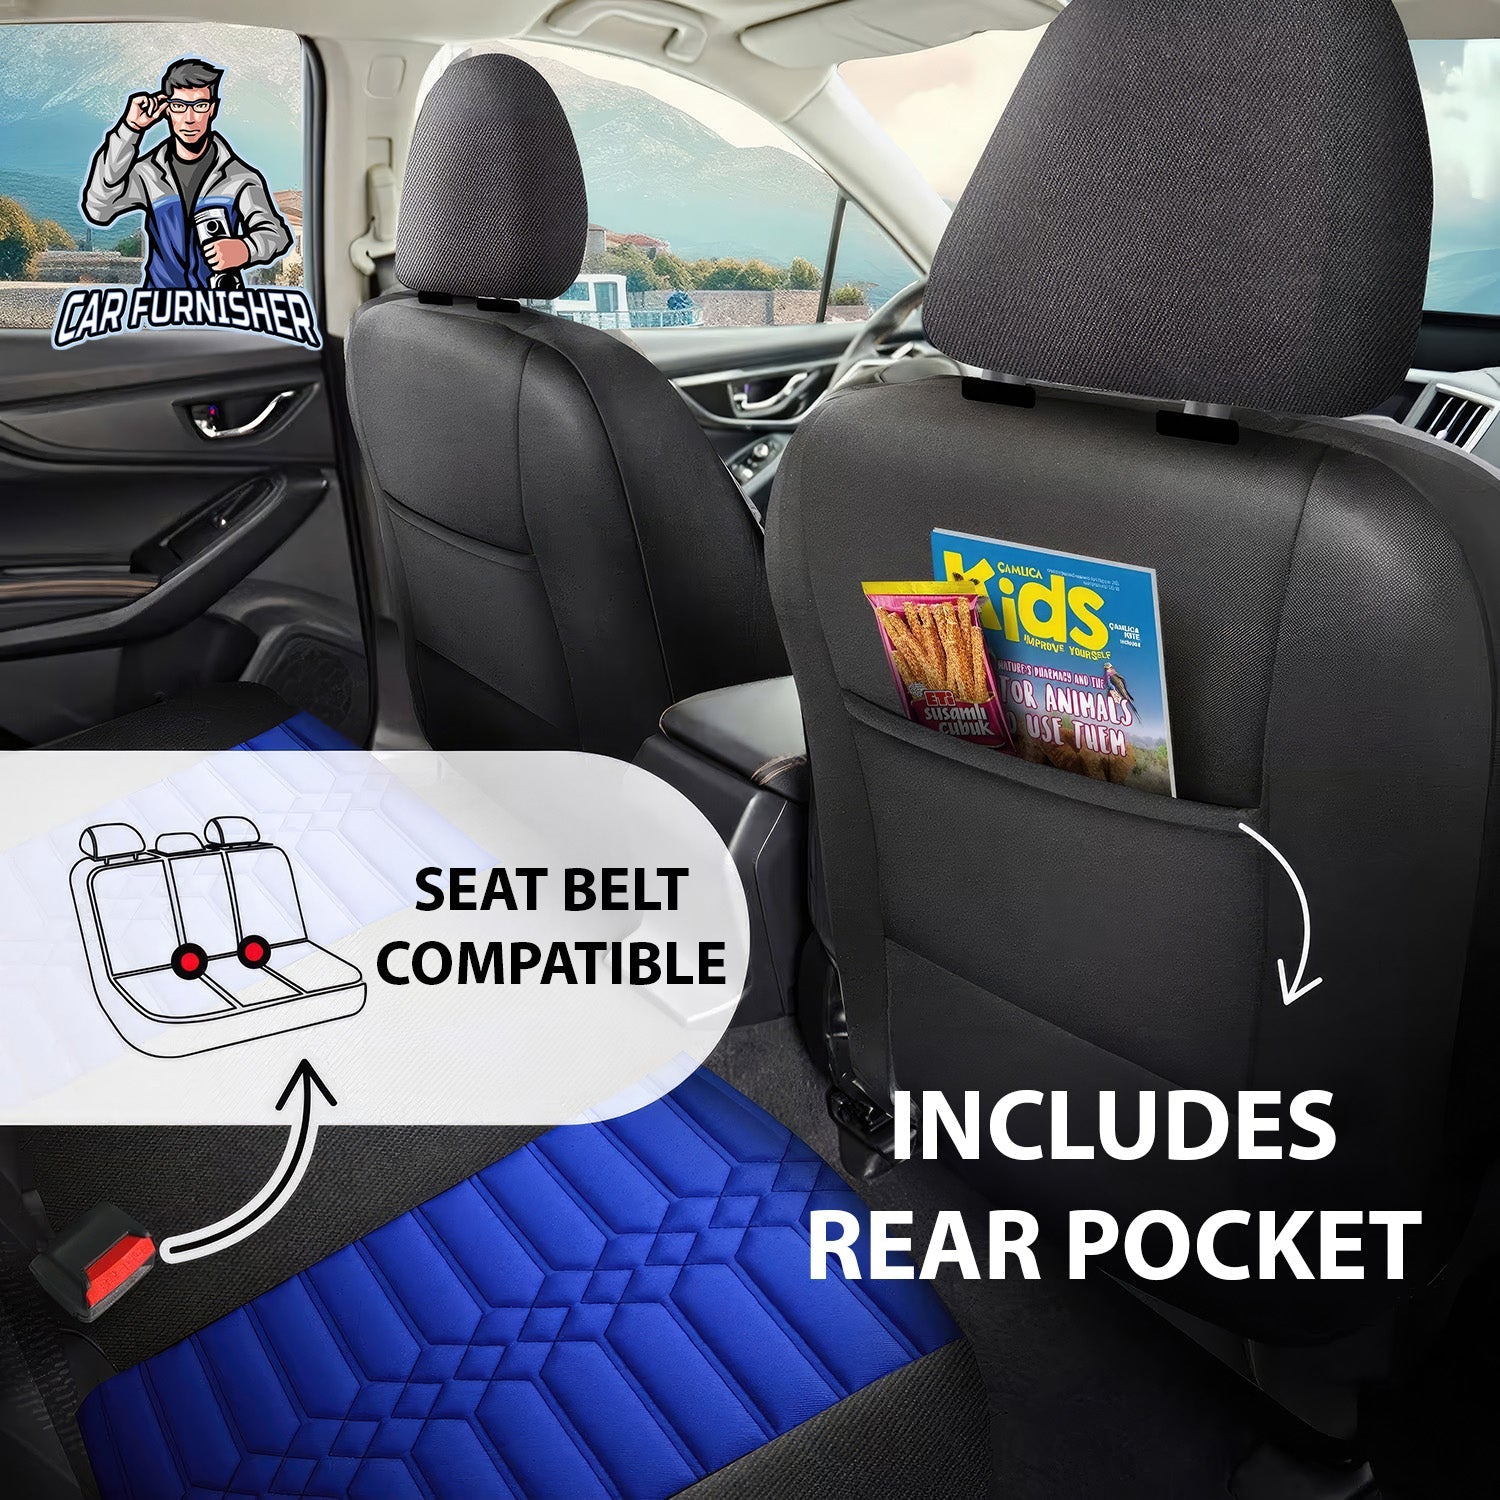 Volkswagen Jetta Seat Covers Athens Design Blue 5 Seats + Headrests (Full Set) Leather & Jacquard Fabric